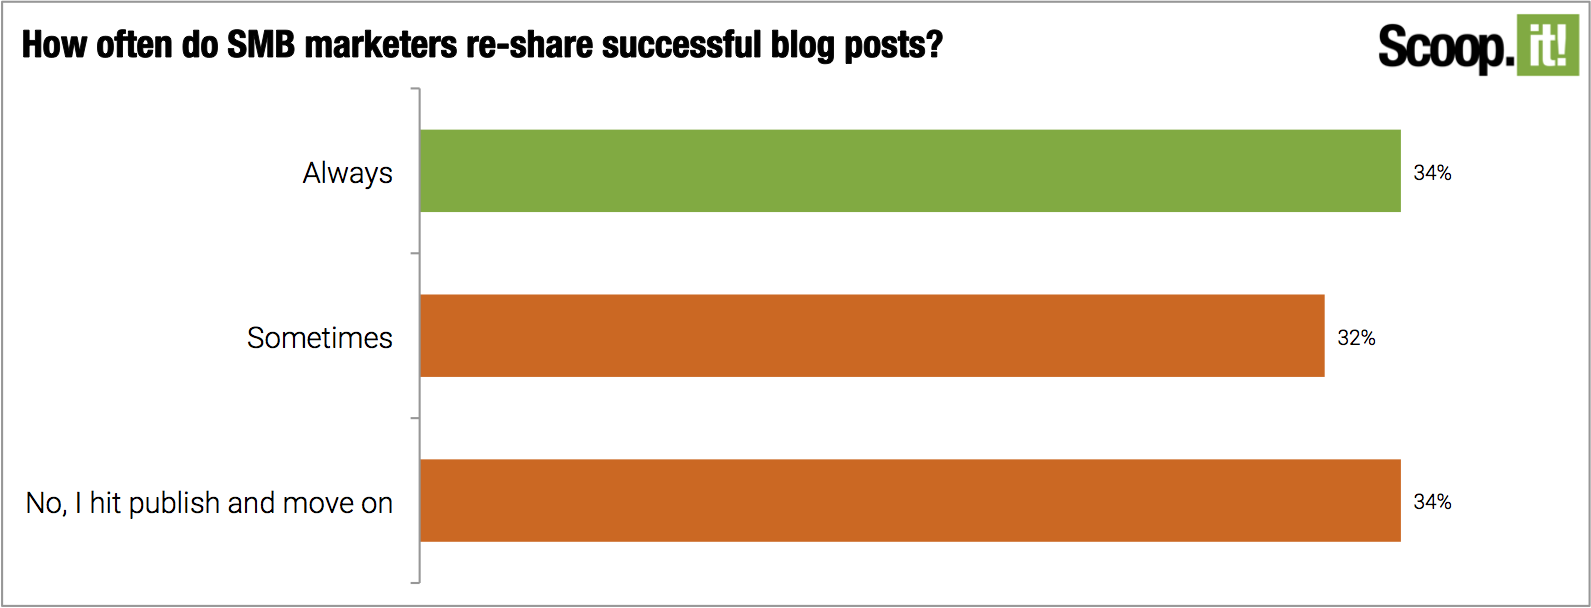 How often do SMB marketers re-share successful blog posts